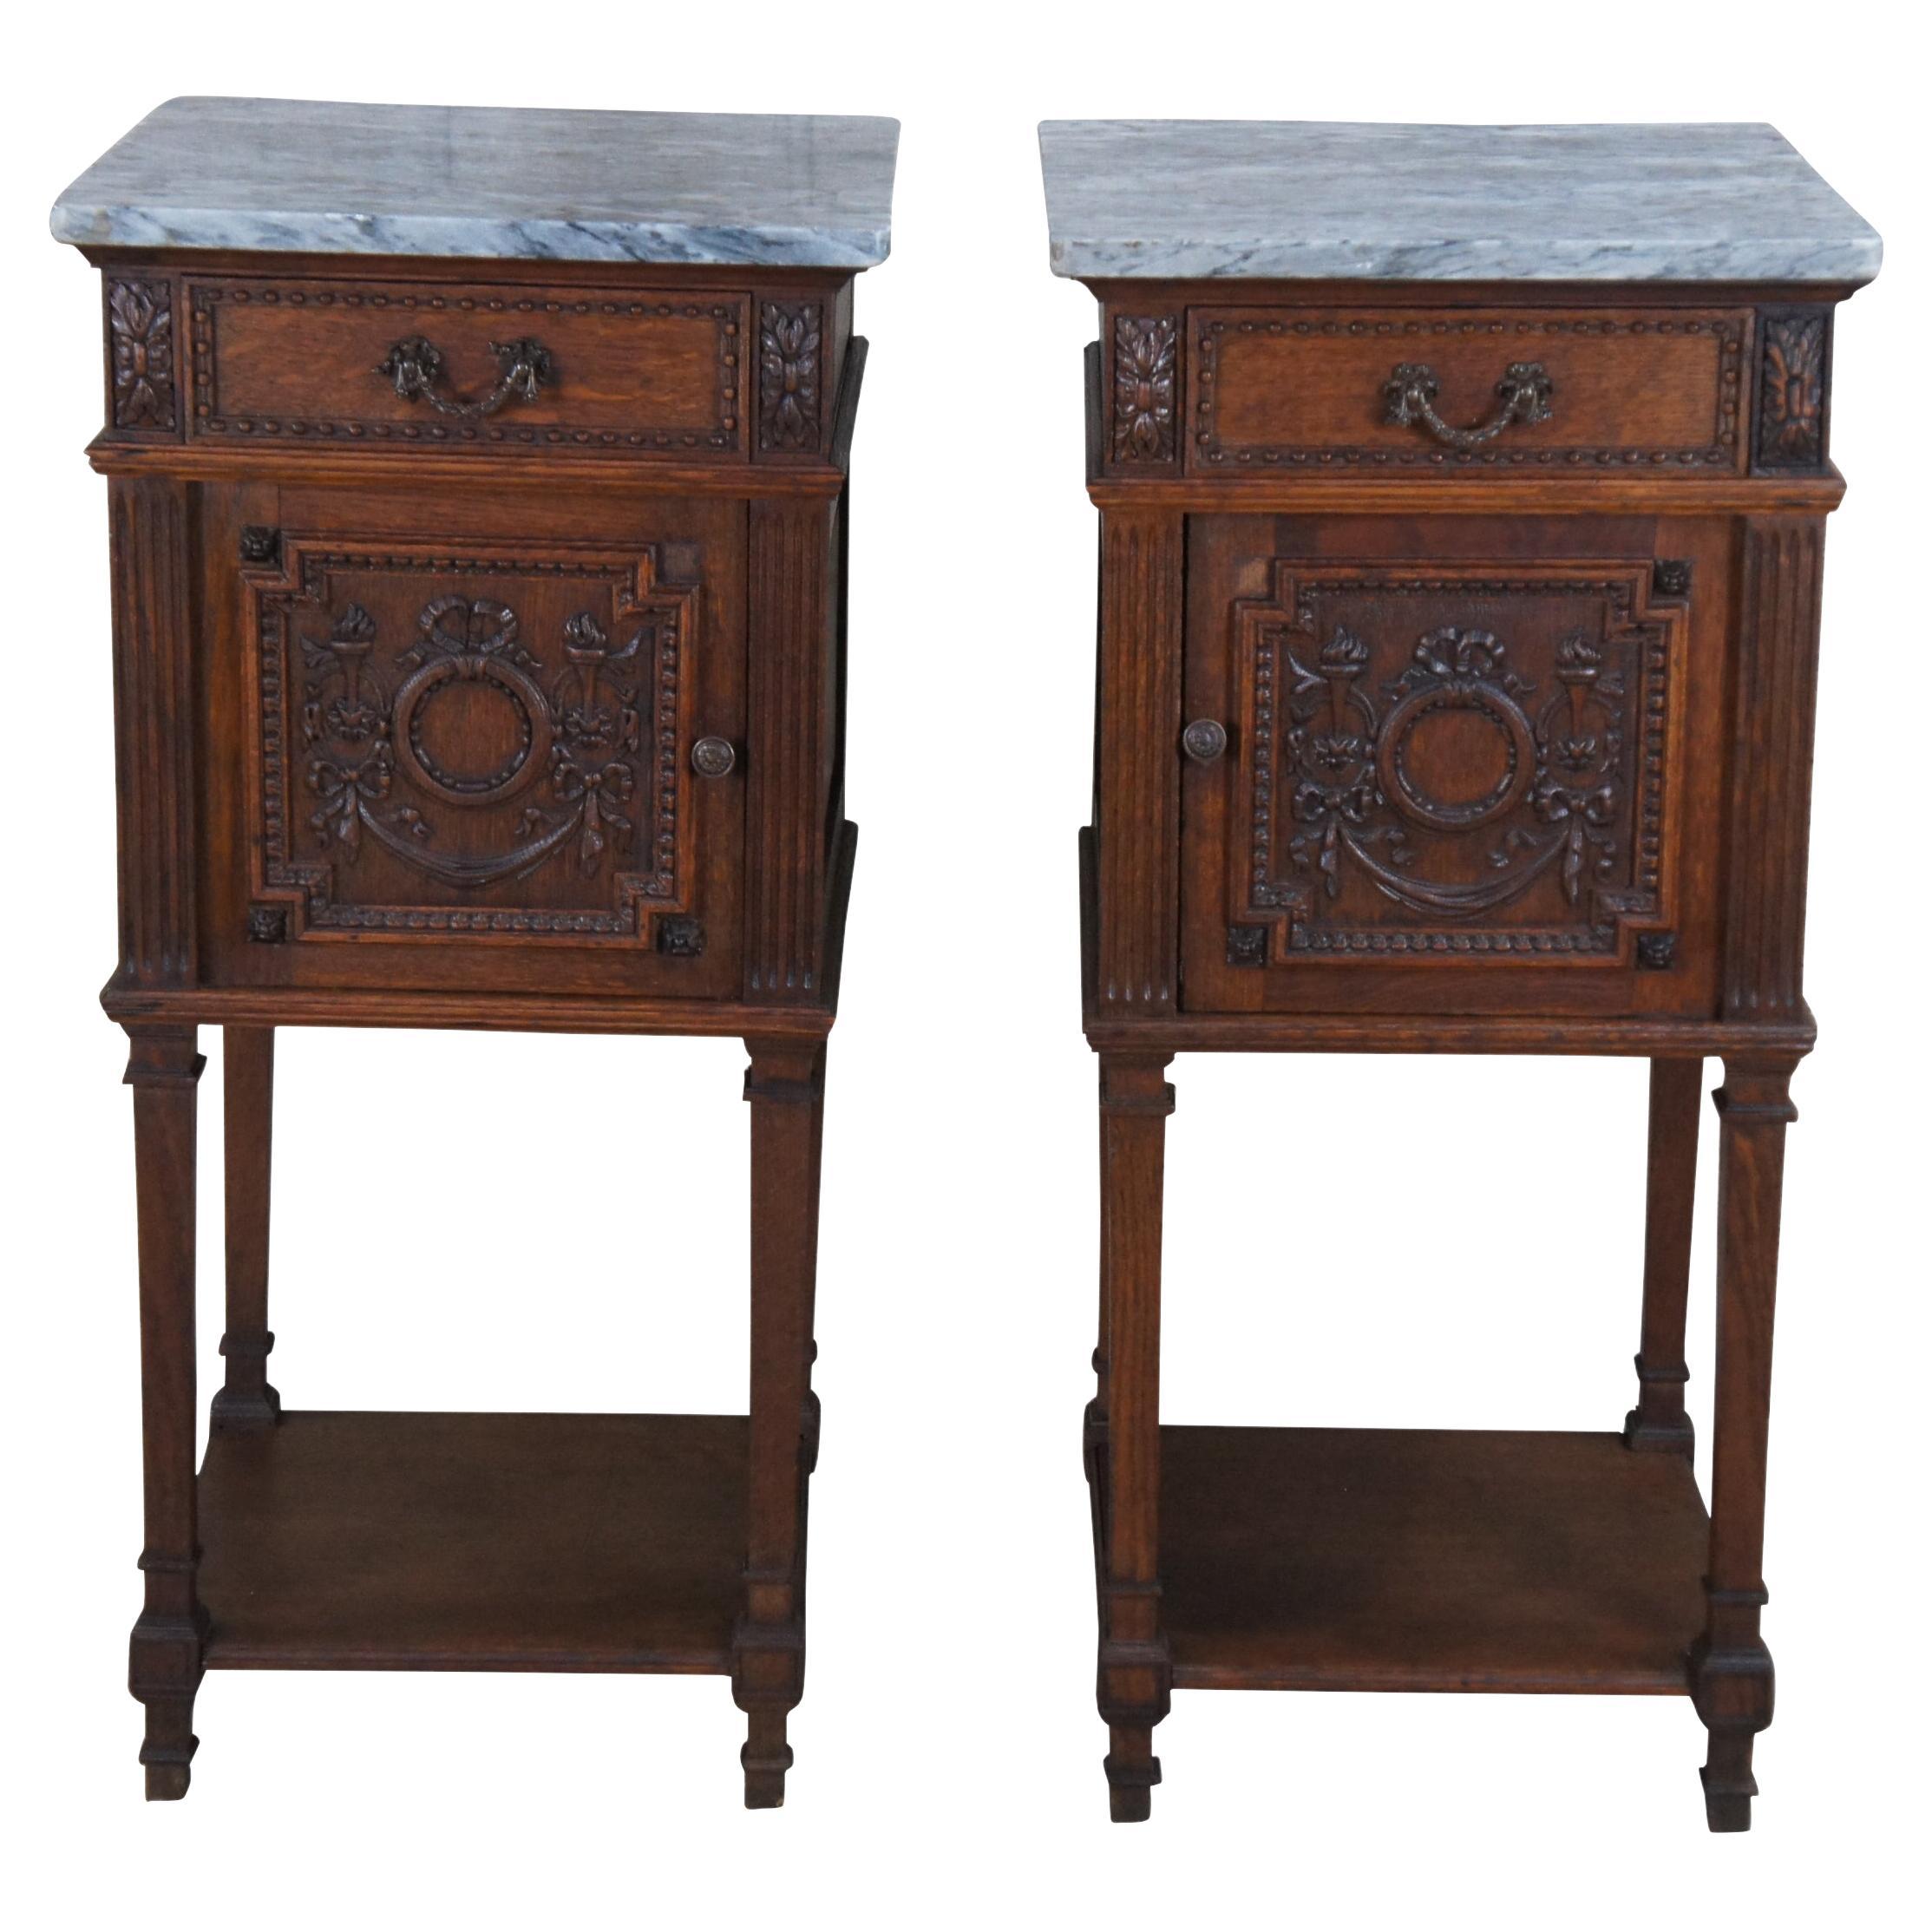 2 Antique French Neoclassical Quartersawn Oak Marble Nightstands Smoking Stands